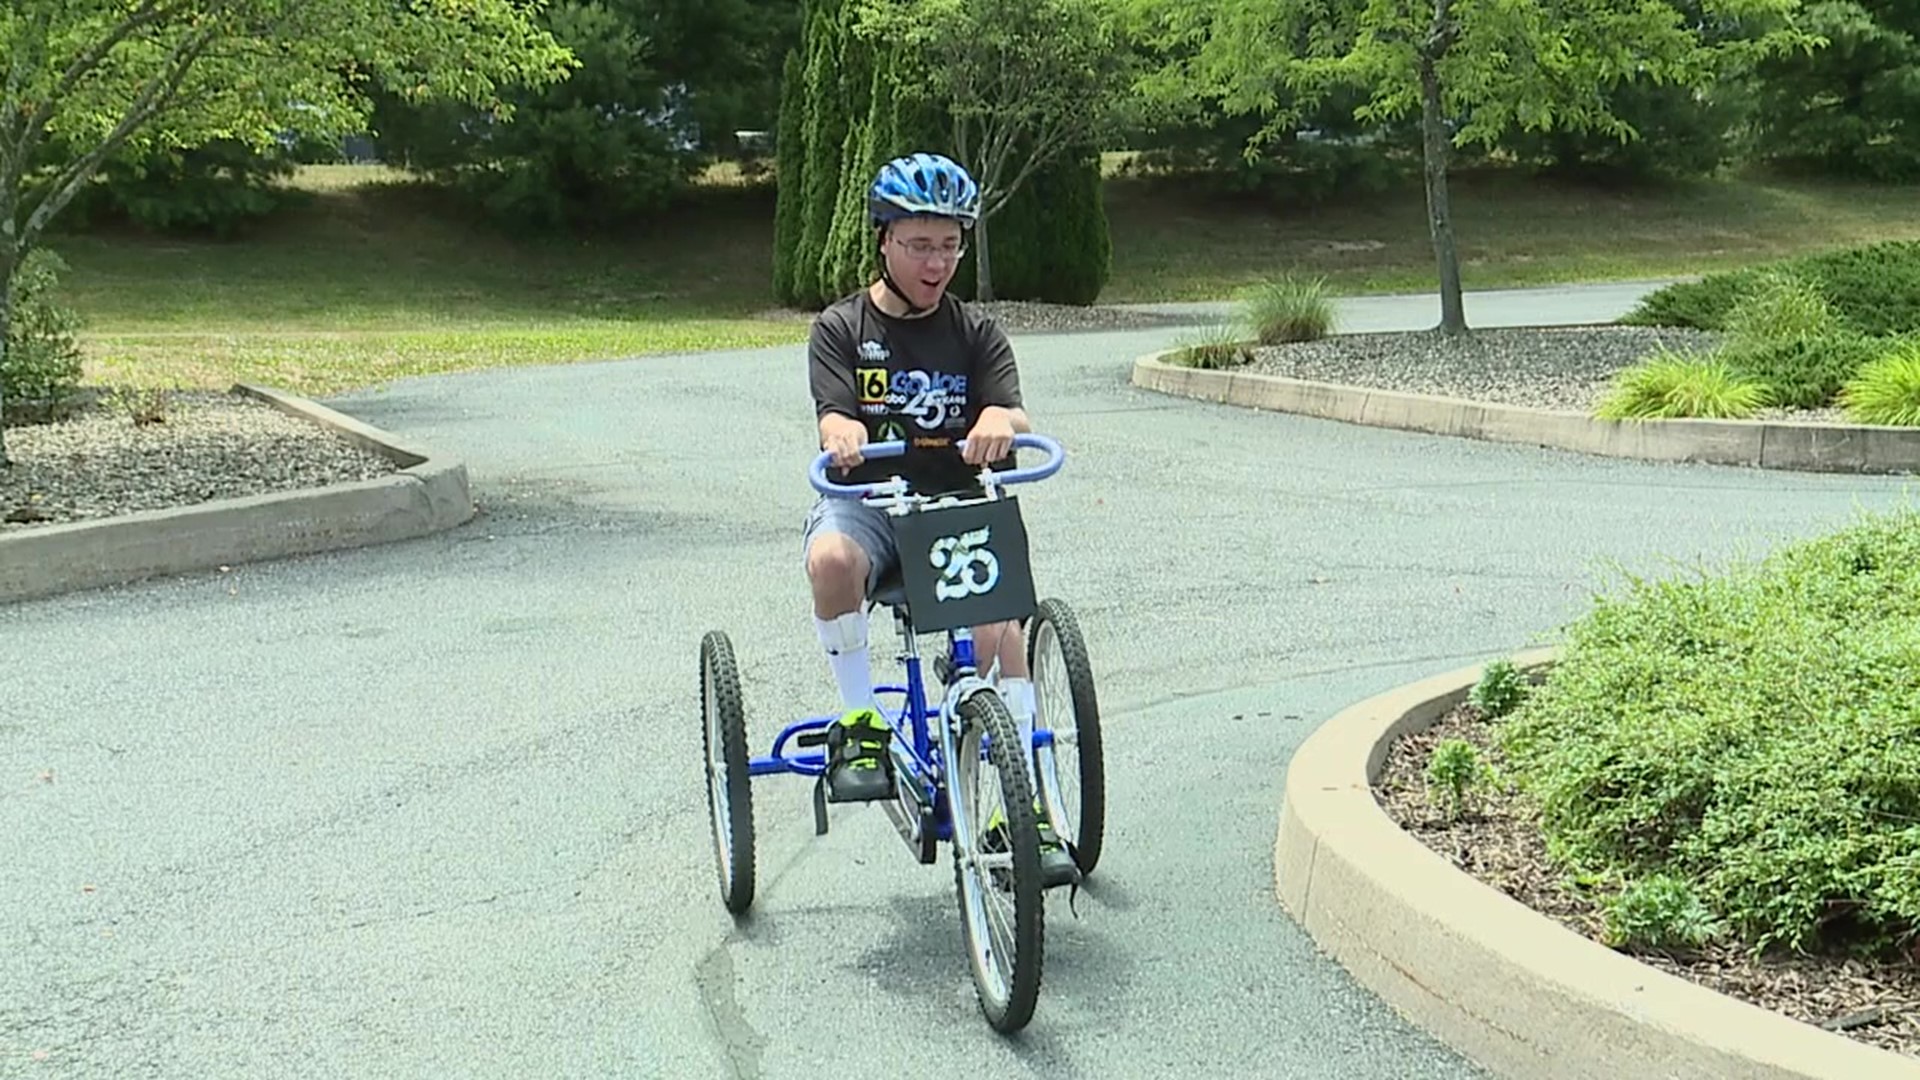 Newswatch 16s Chris Keating shows us how the young man is doing so with the help of his tricycle.